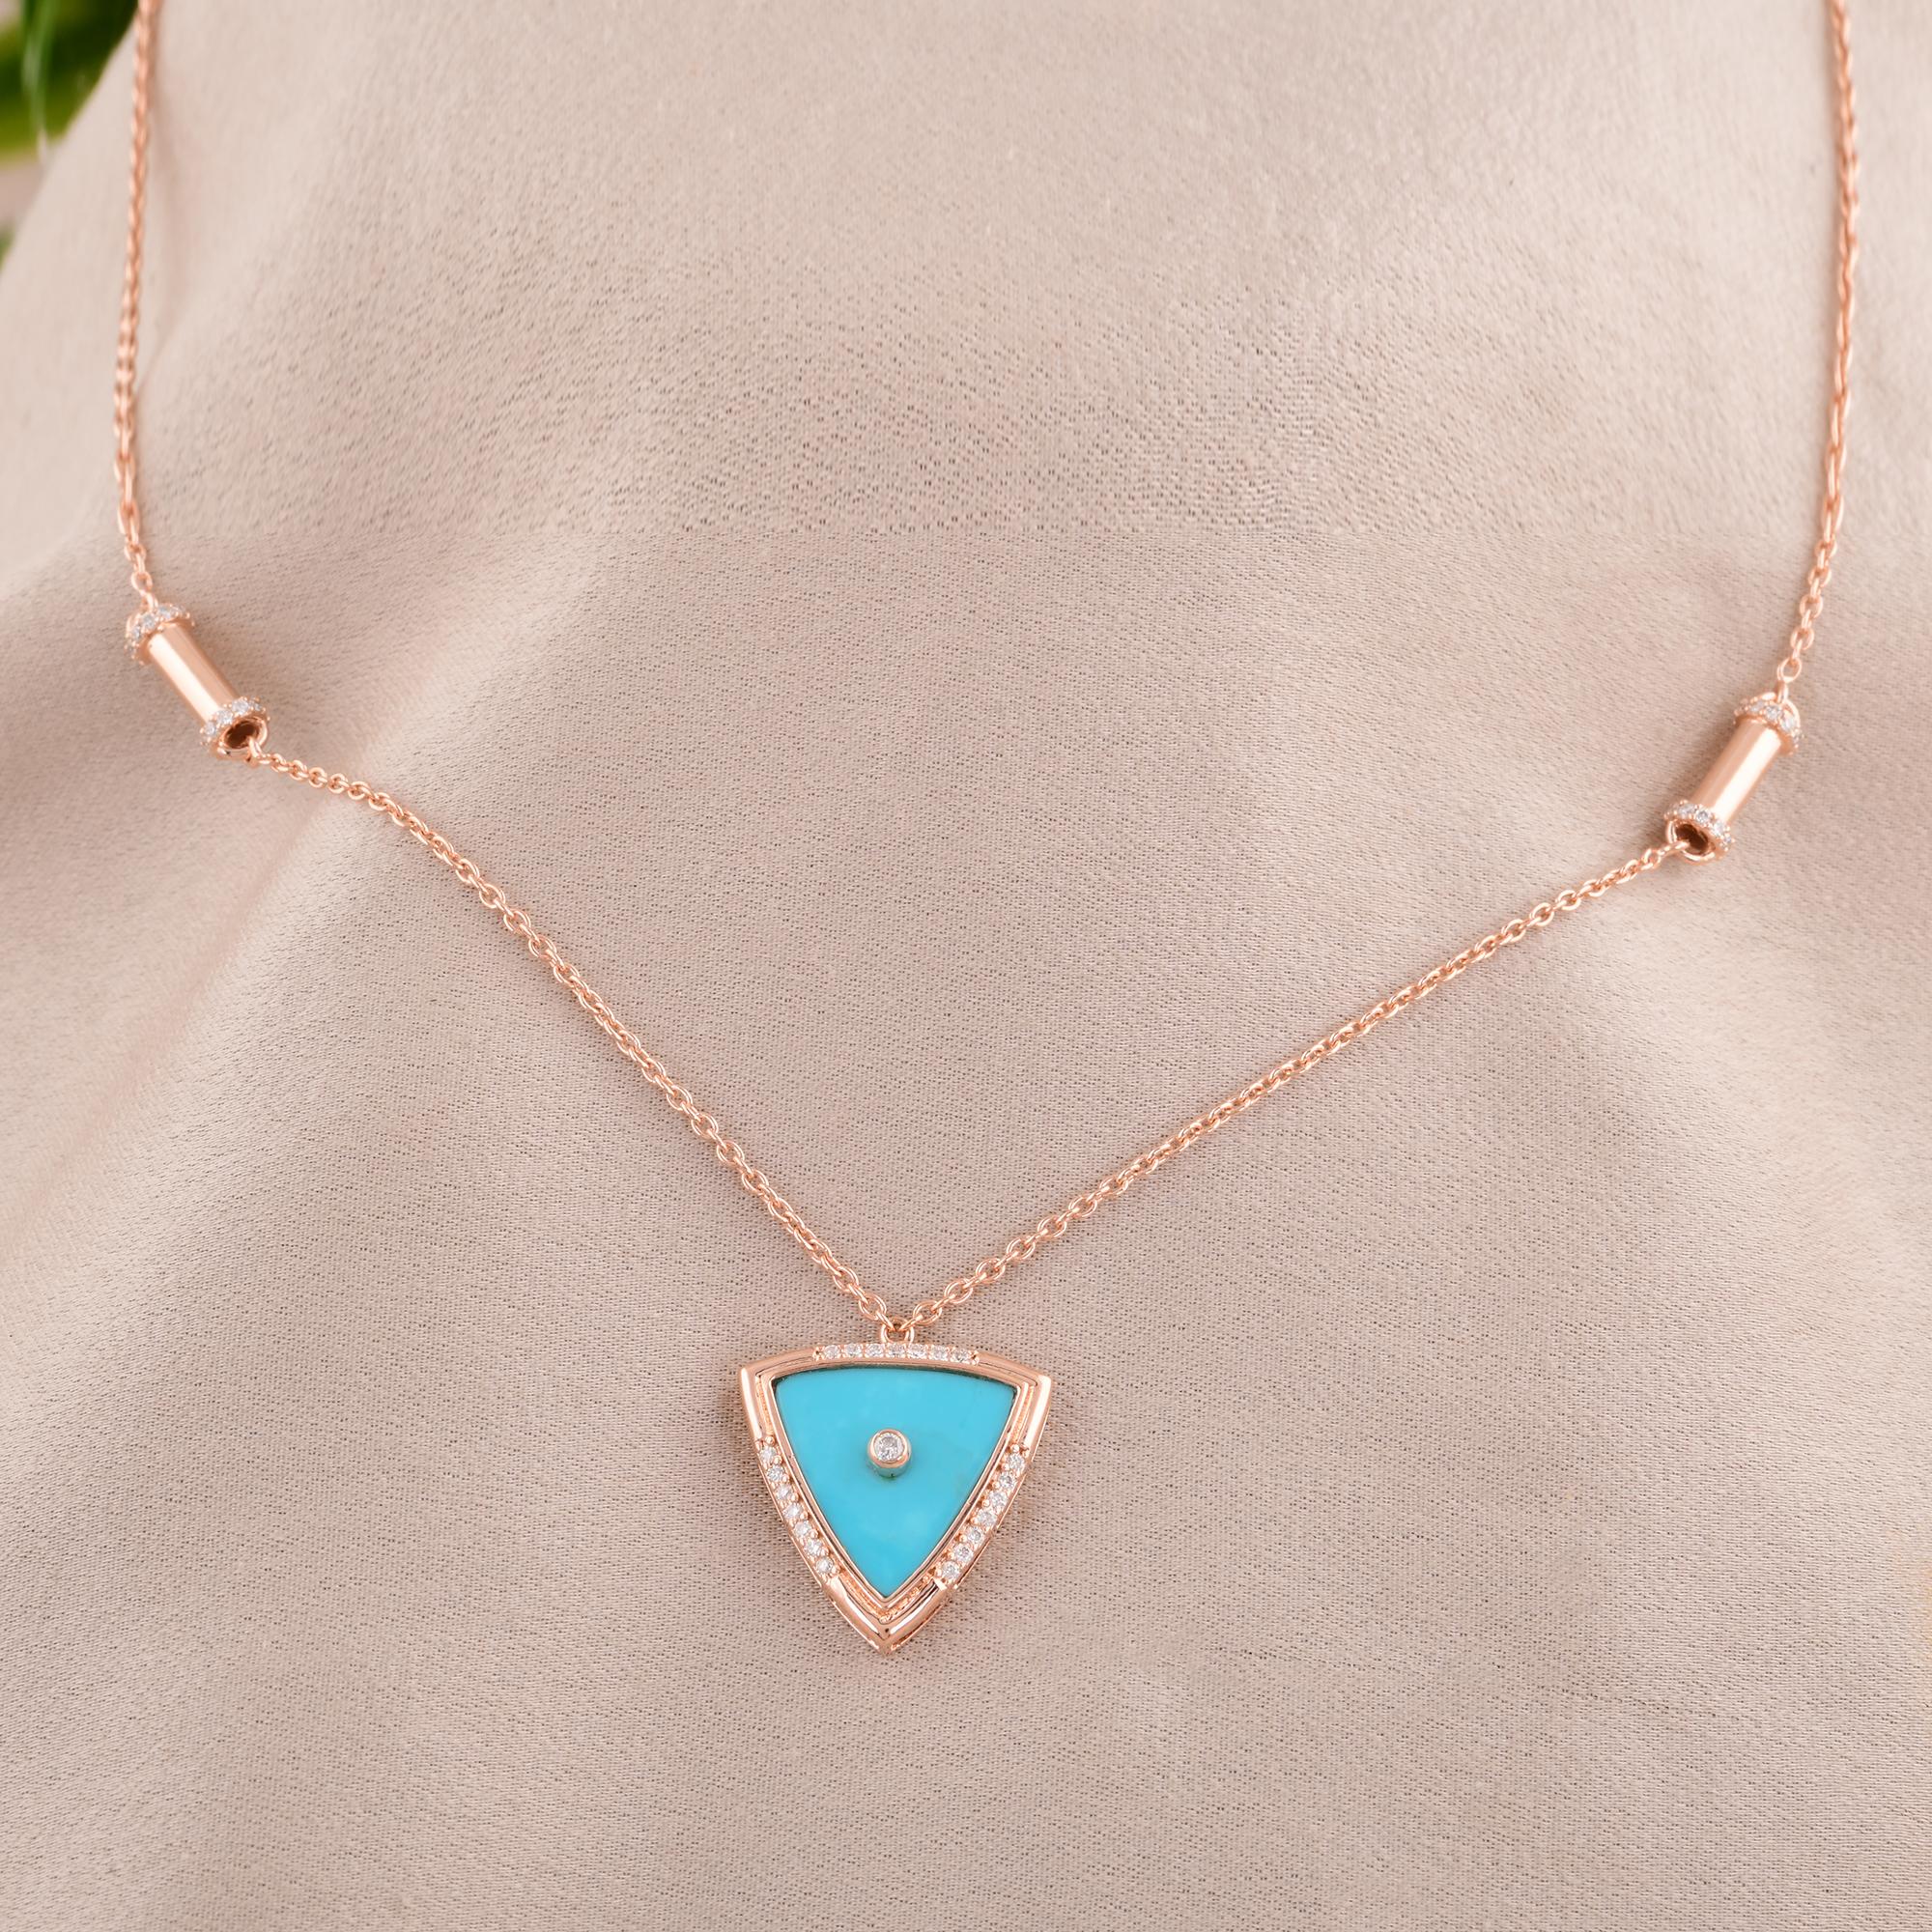 Immerse yourself in the enchanting allure of this exquisite Natural Turquoise Gemstone Arrowhead Pendant Necklace, adorned with shimmering diamonds and meticulously crafted in 14 karat rose gold. This stunning piece of jewelry is a celebration of